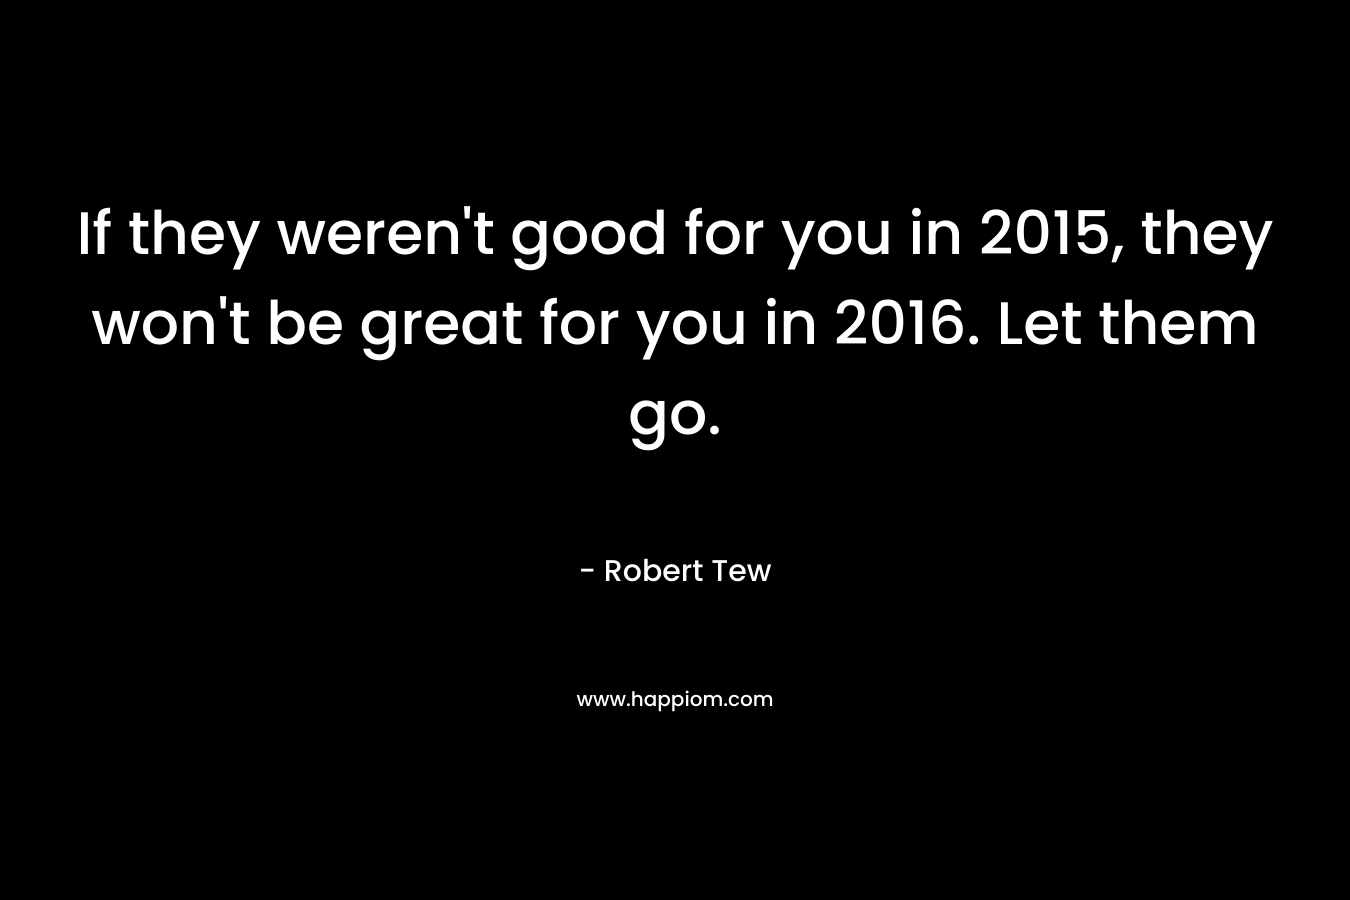 If they weren’t good for you in 2015, they won’t be great for you in 2016. Let them go. – Robert Tew